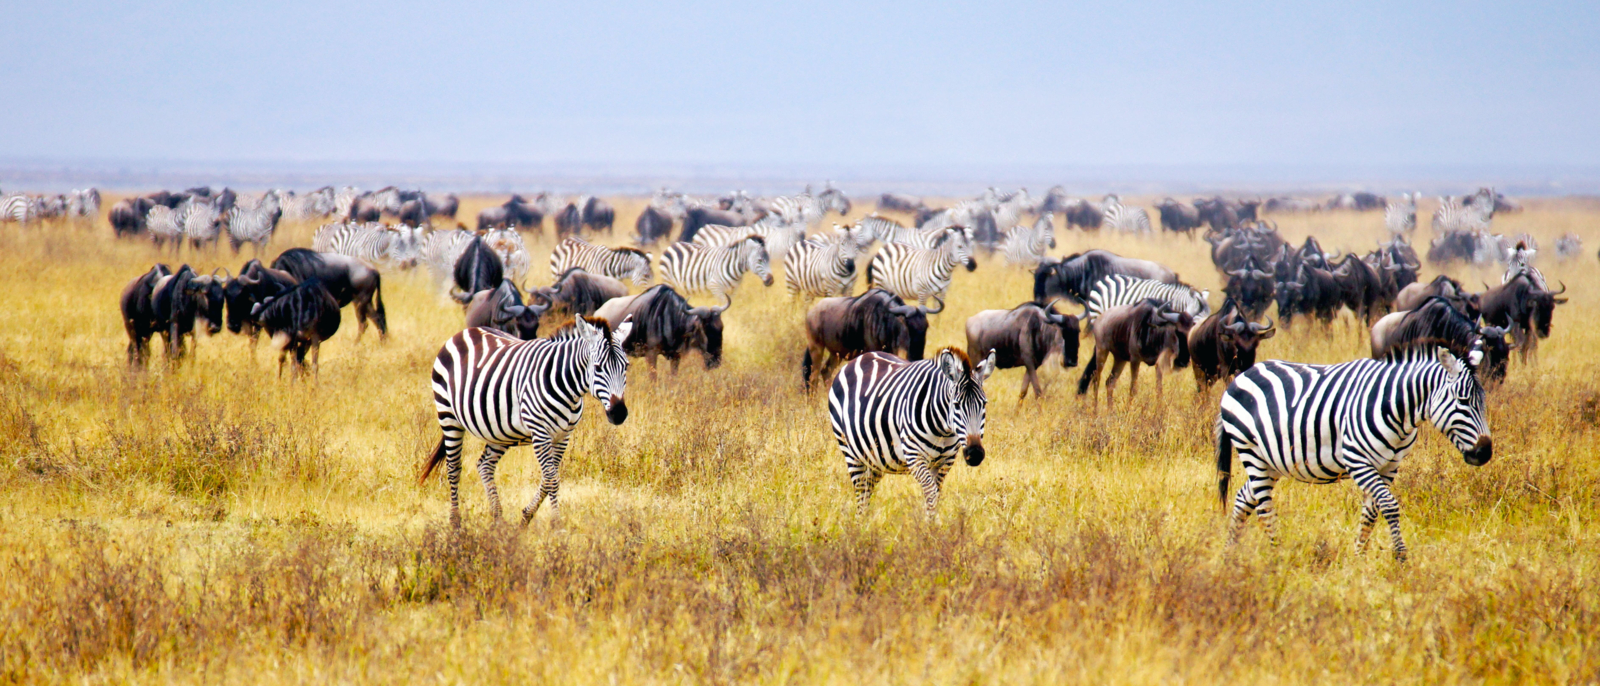 wildebeest and zebra's are grazing on the savannah in Africa